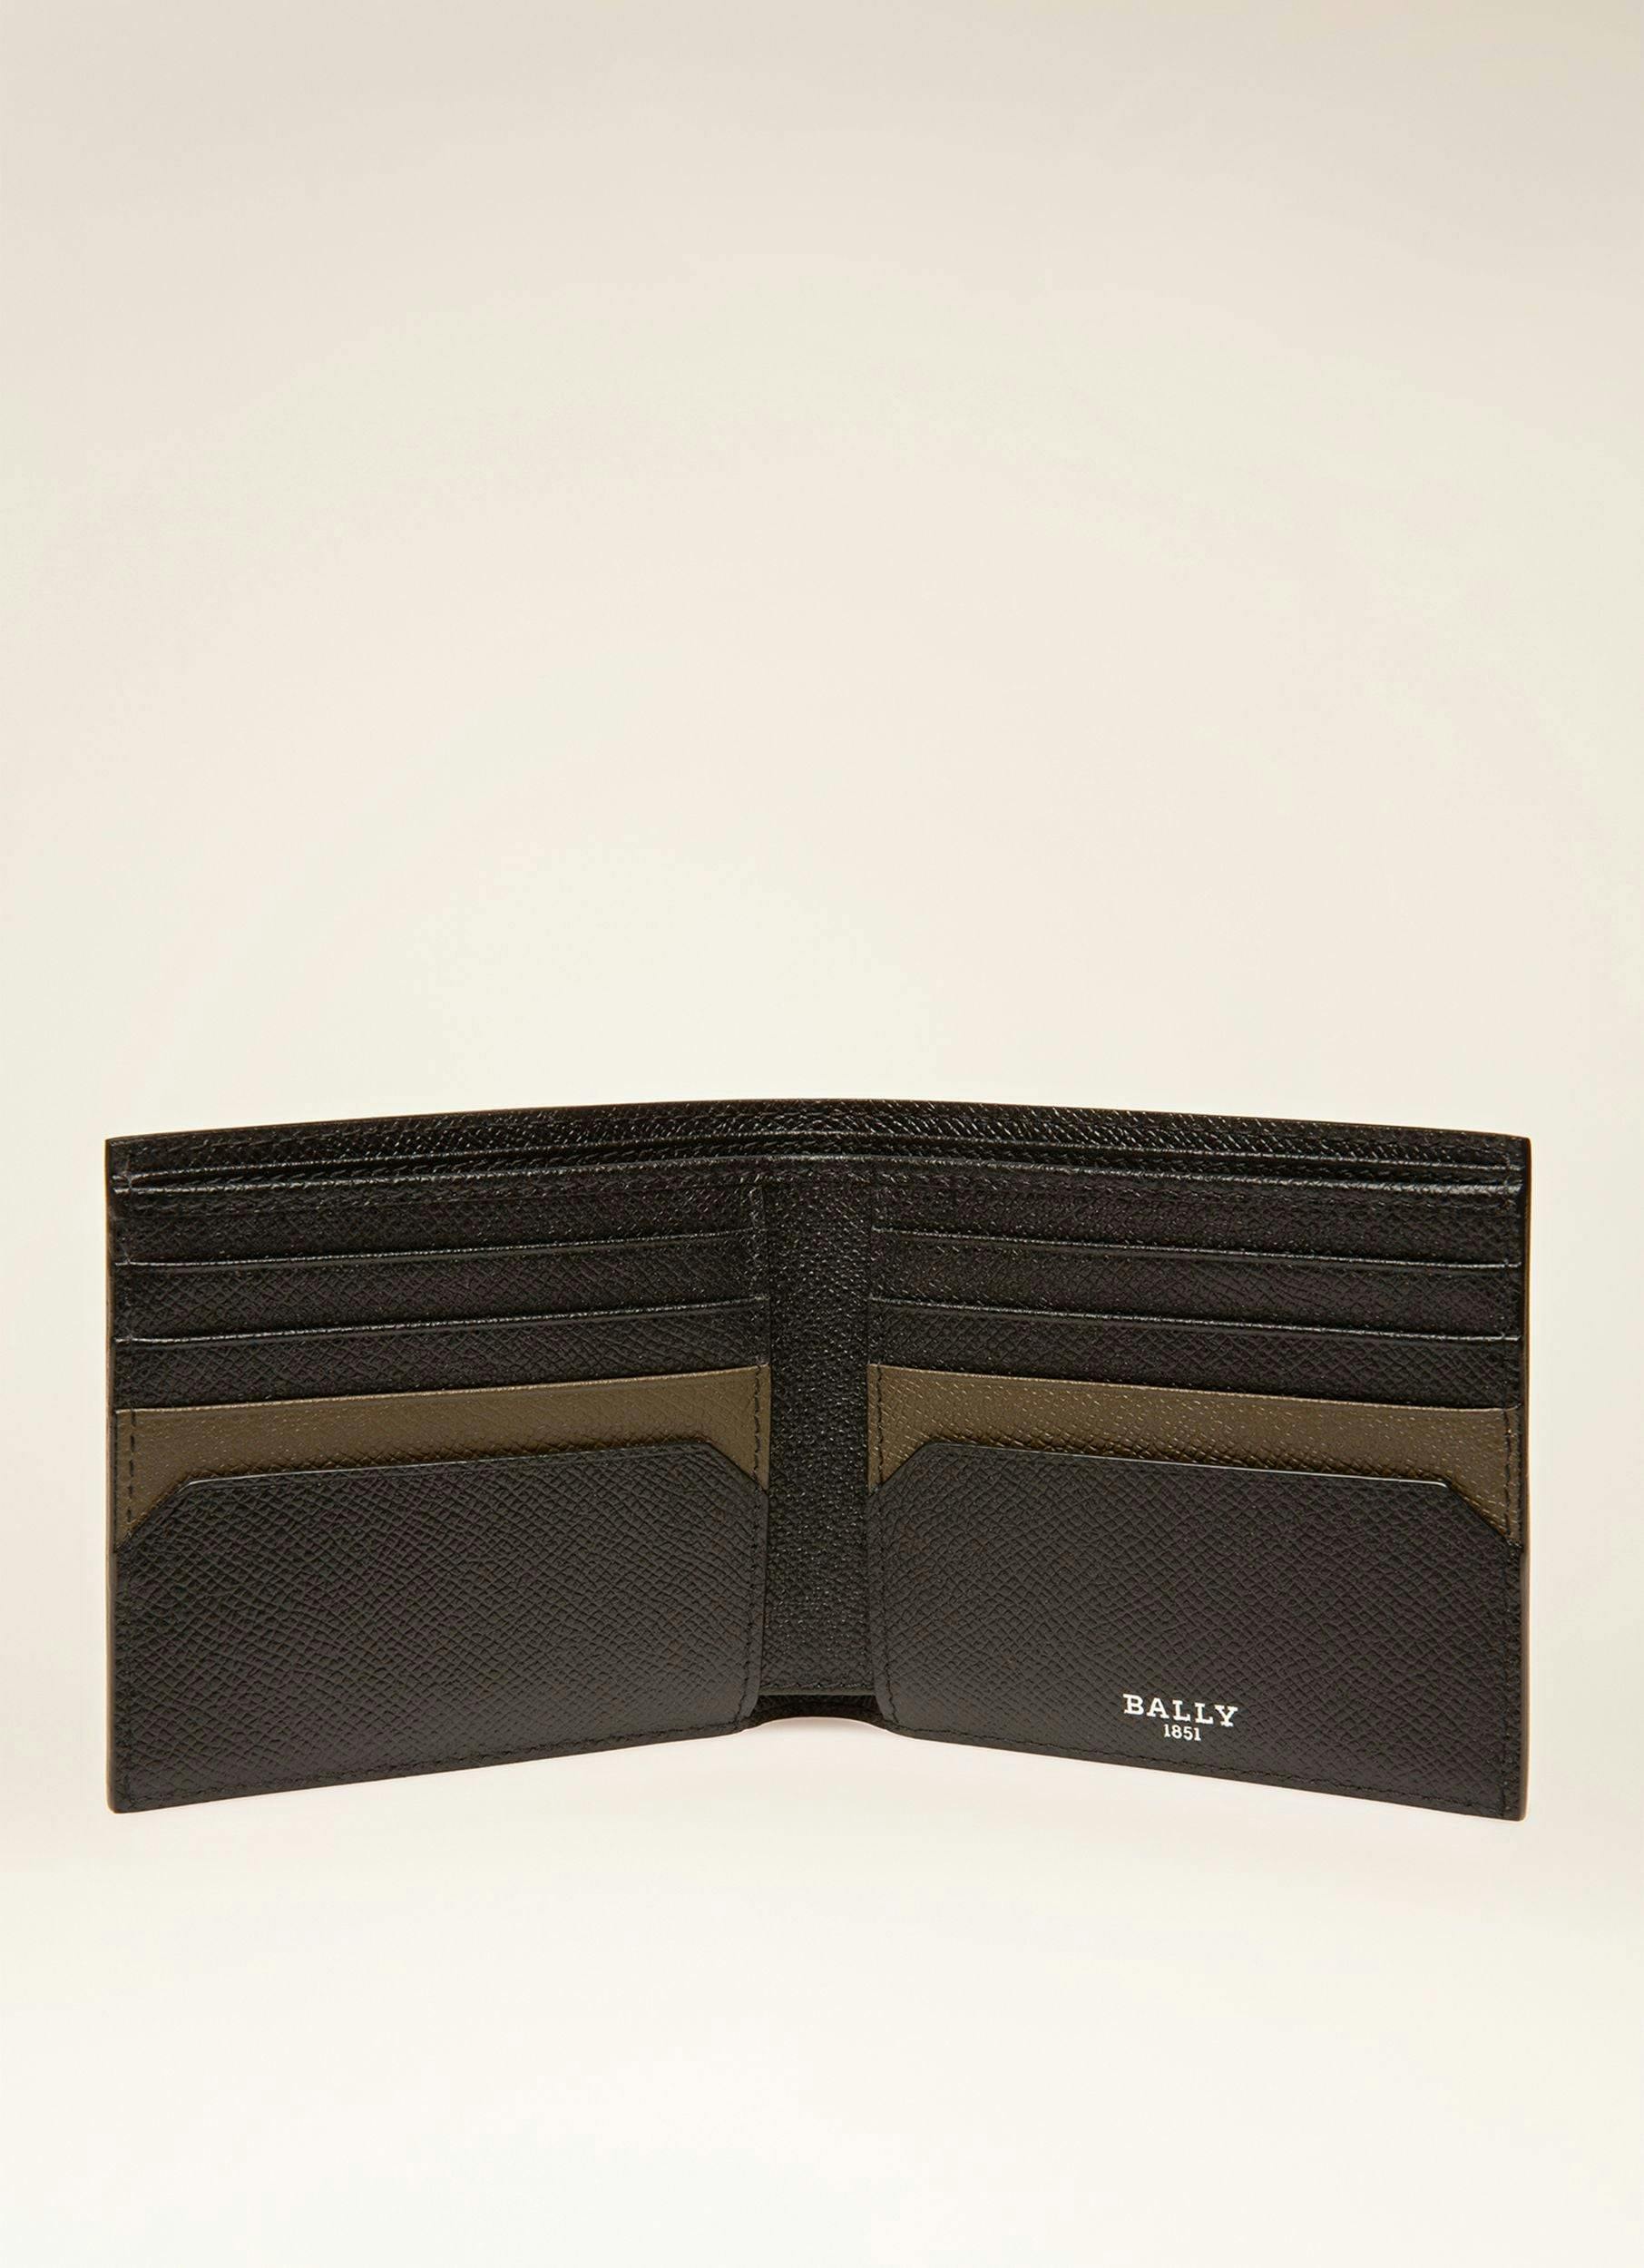 BALLY ICONIC Leather Wallet In Black - Men's - Bally - 03